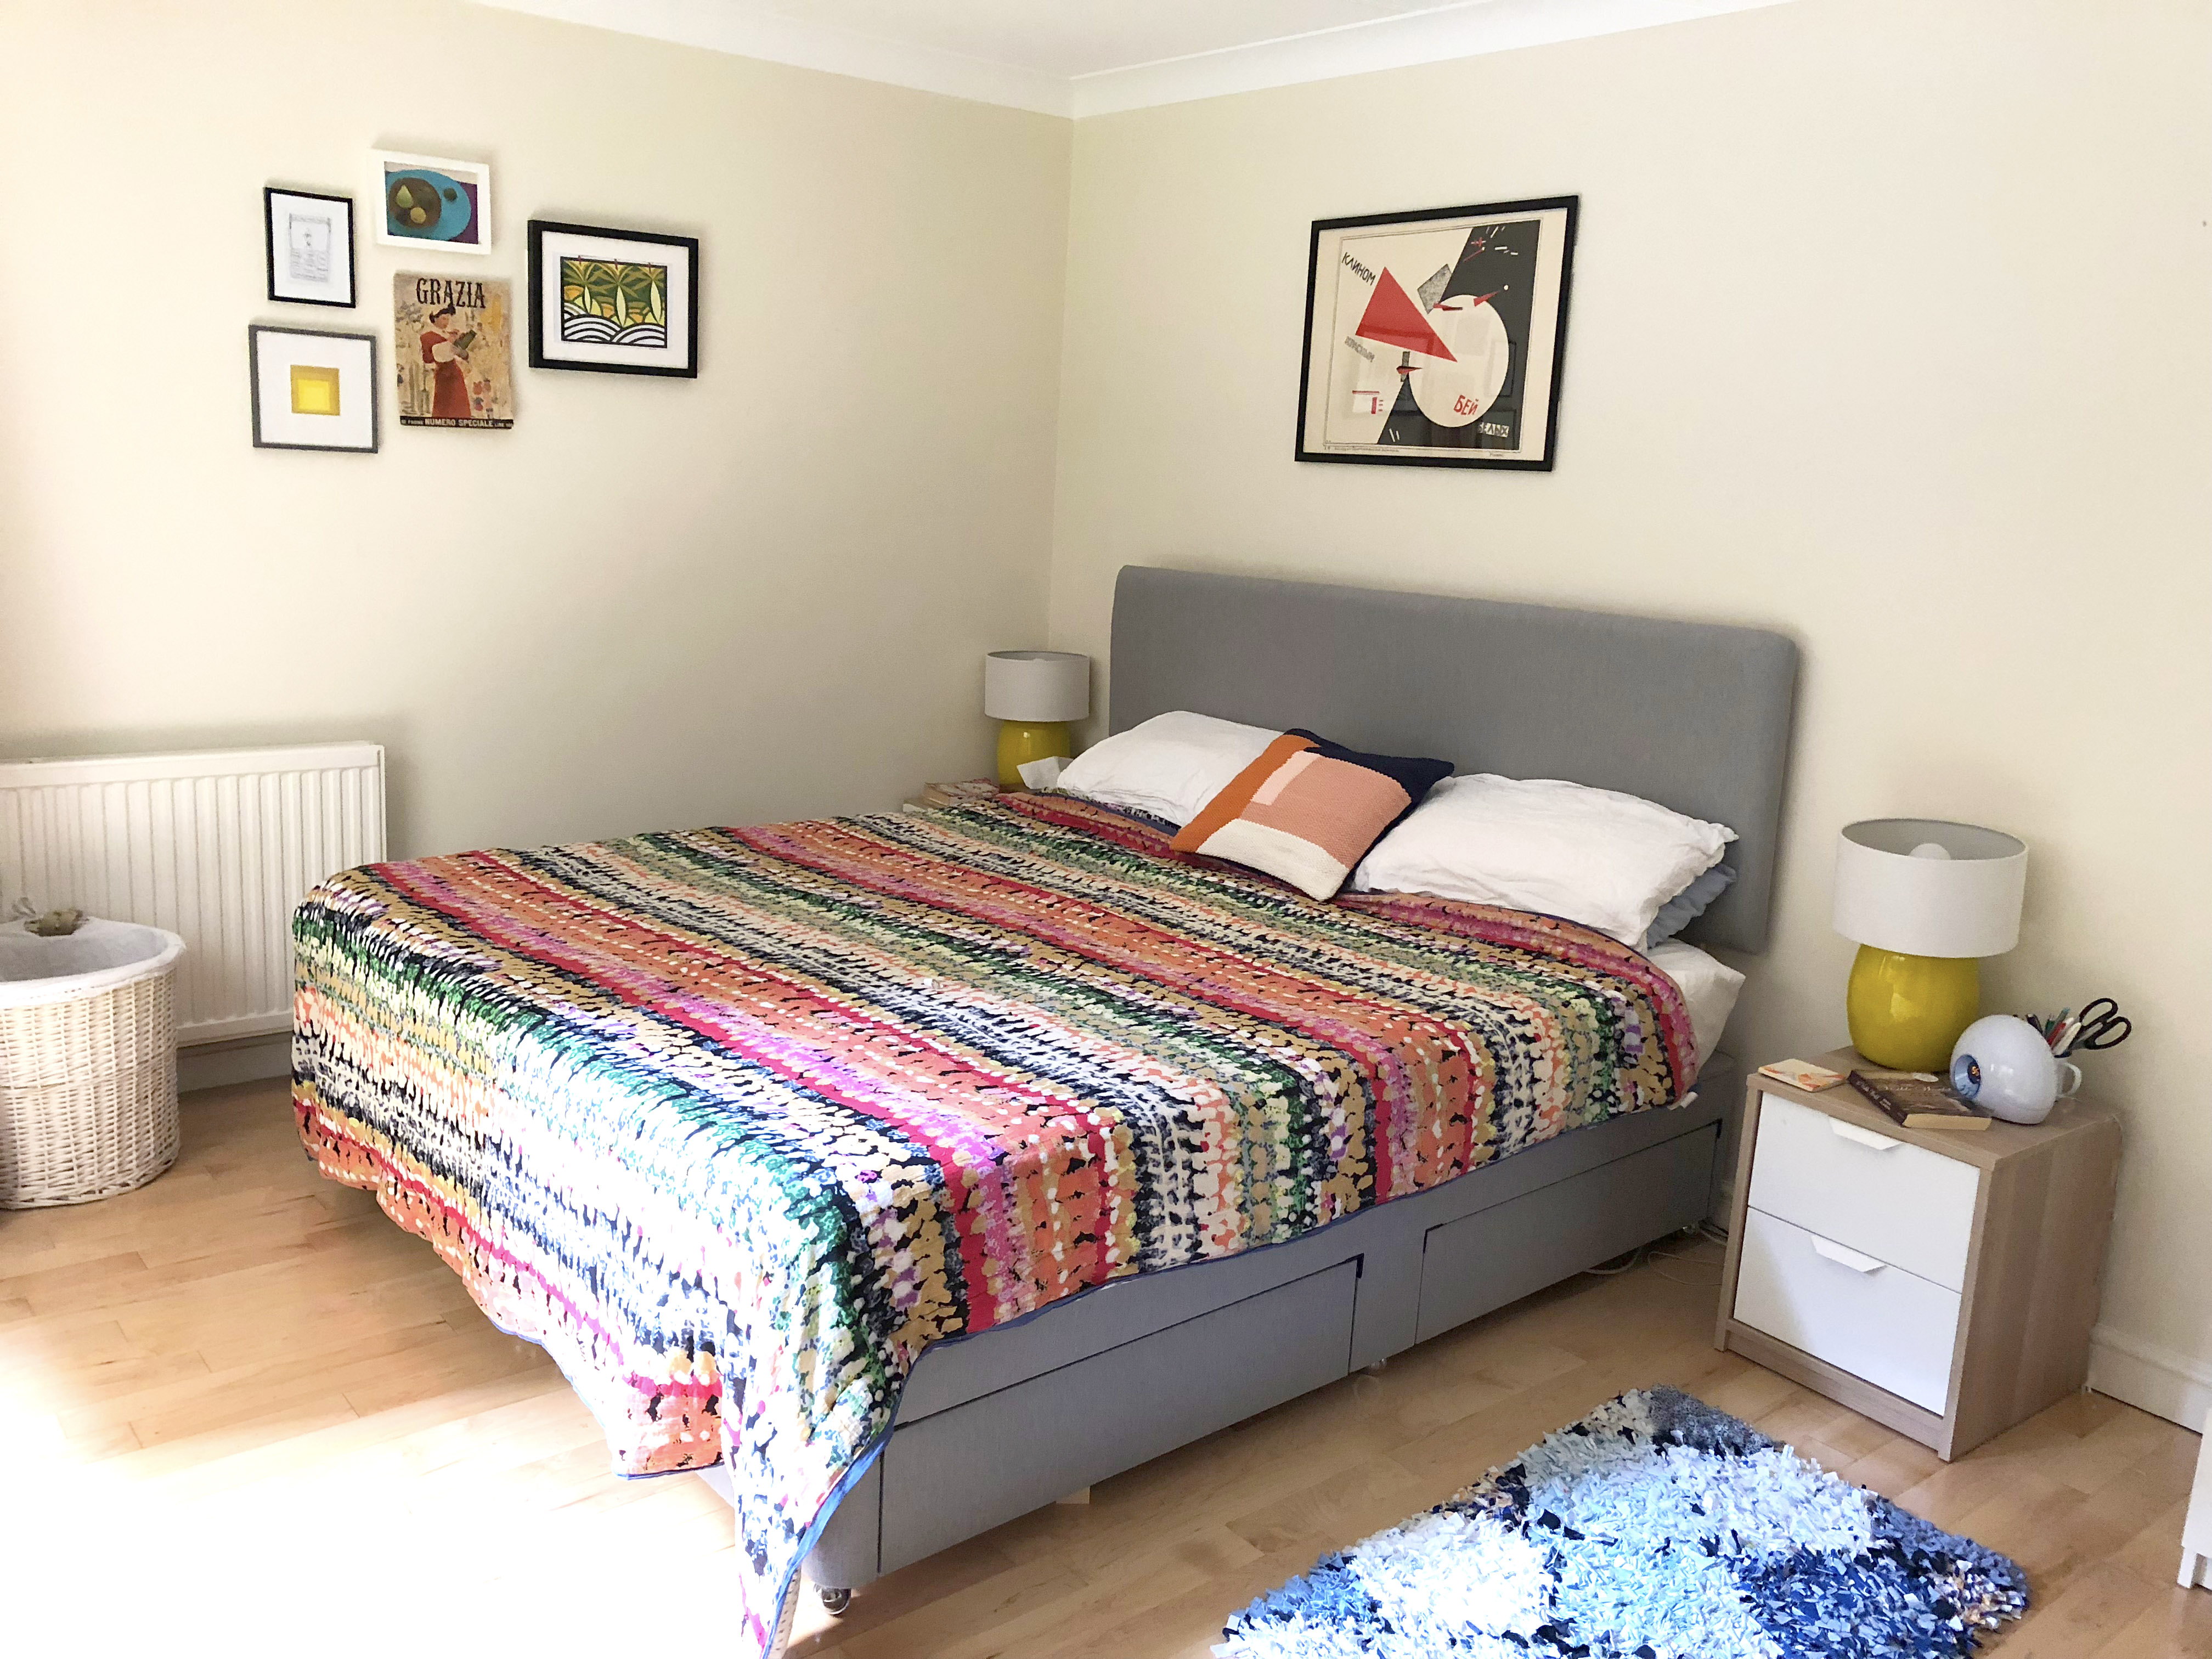 Brightly coloured bedroom in new Wapping flat with colourful Anthropologie bedspread